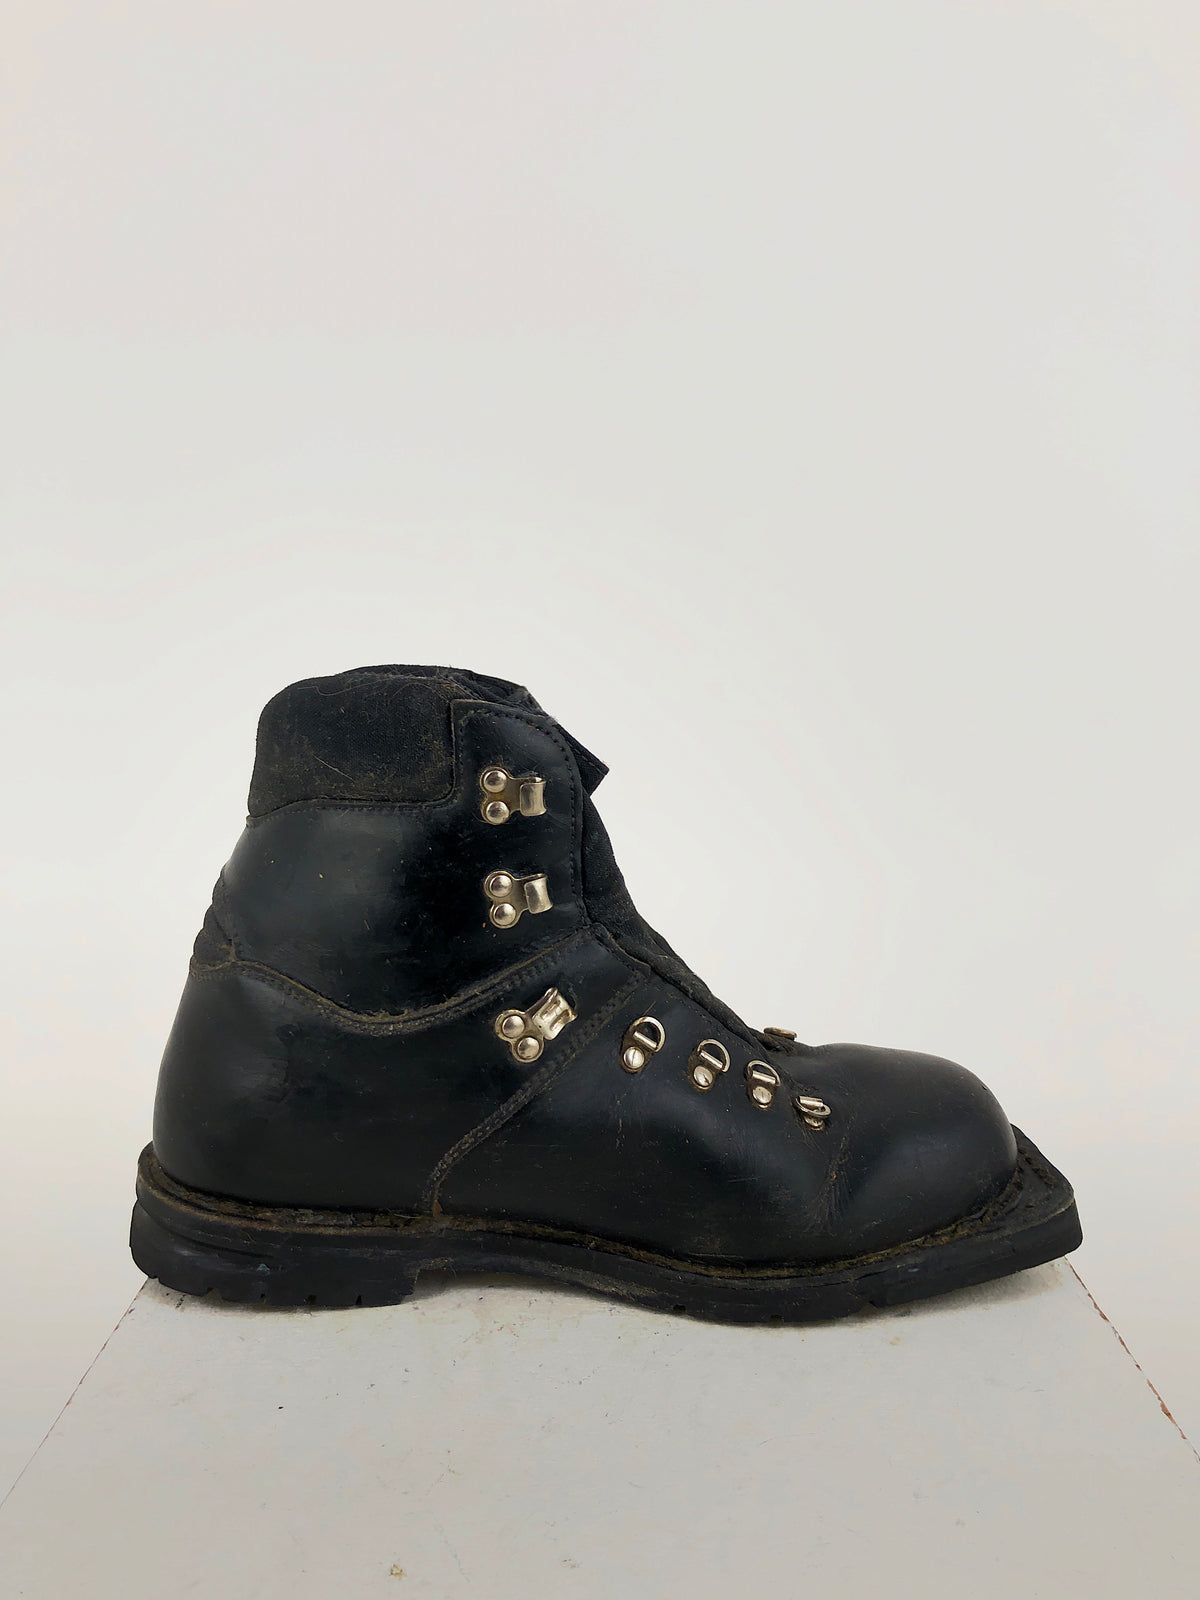 10.5 Merrell Leather Boots (Used)